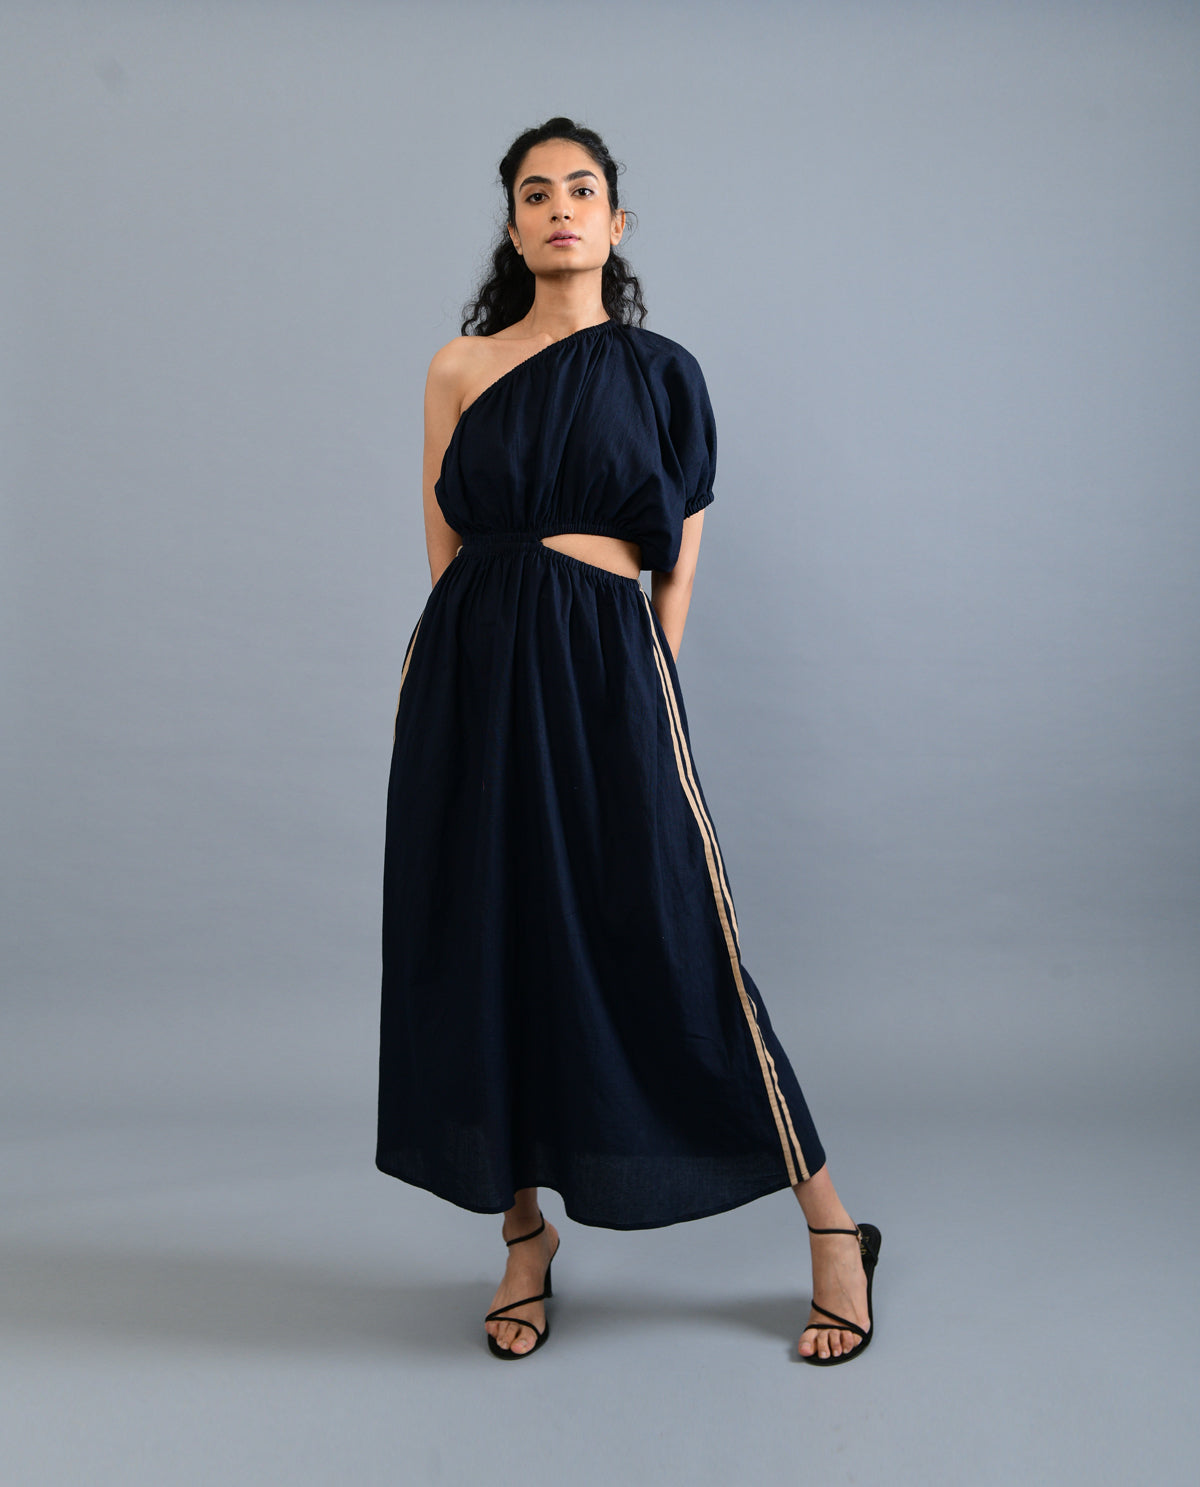 Black Solid Midi Dress at Kamakhyaa by Rias Jaipur. This item is Black, Casual Wear, Handloom Cotton, Handspun, Handwoven, Hue, Midi Dresses, One Shoulder Dresses, Relaxed Fit, Solids, Stripes, Womenswear